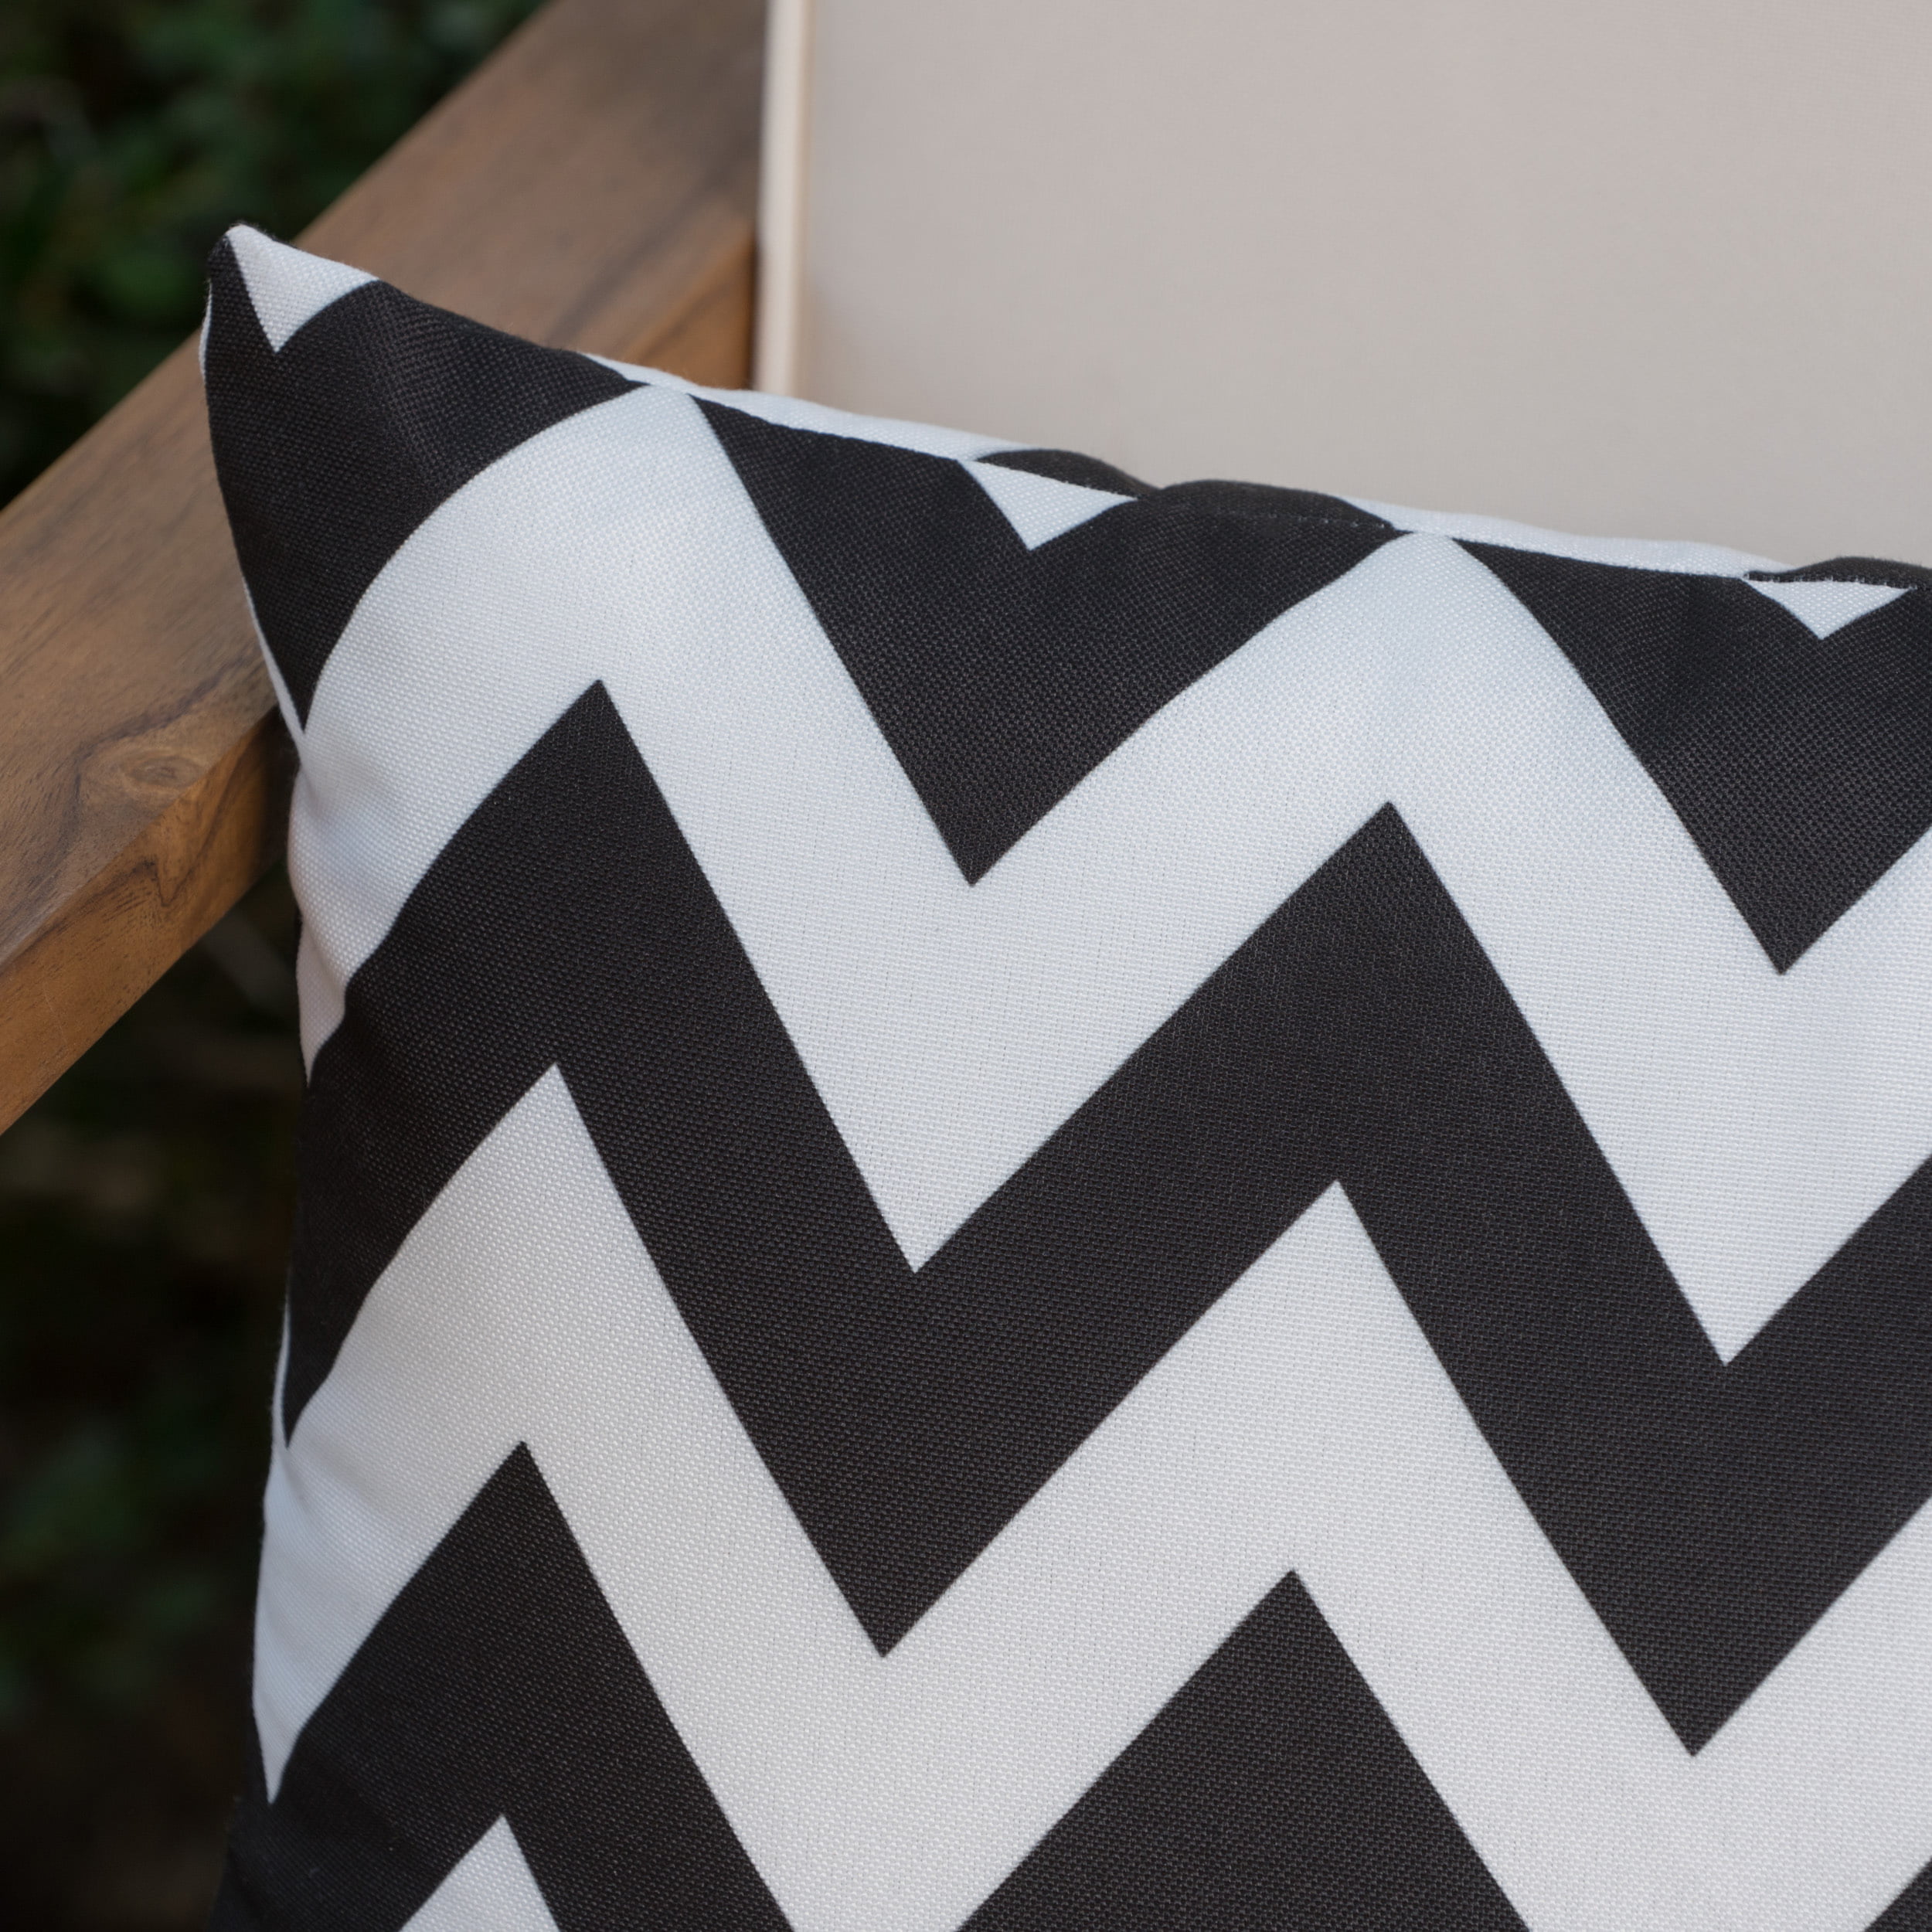 Greylin Outdoor Square Fabric Solid and Chevron Water Resistant Throw Pillows, Set of 4, Dark Teal, White